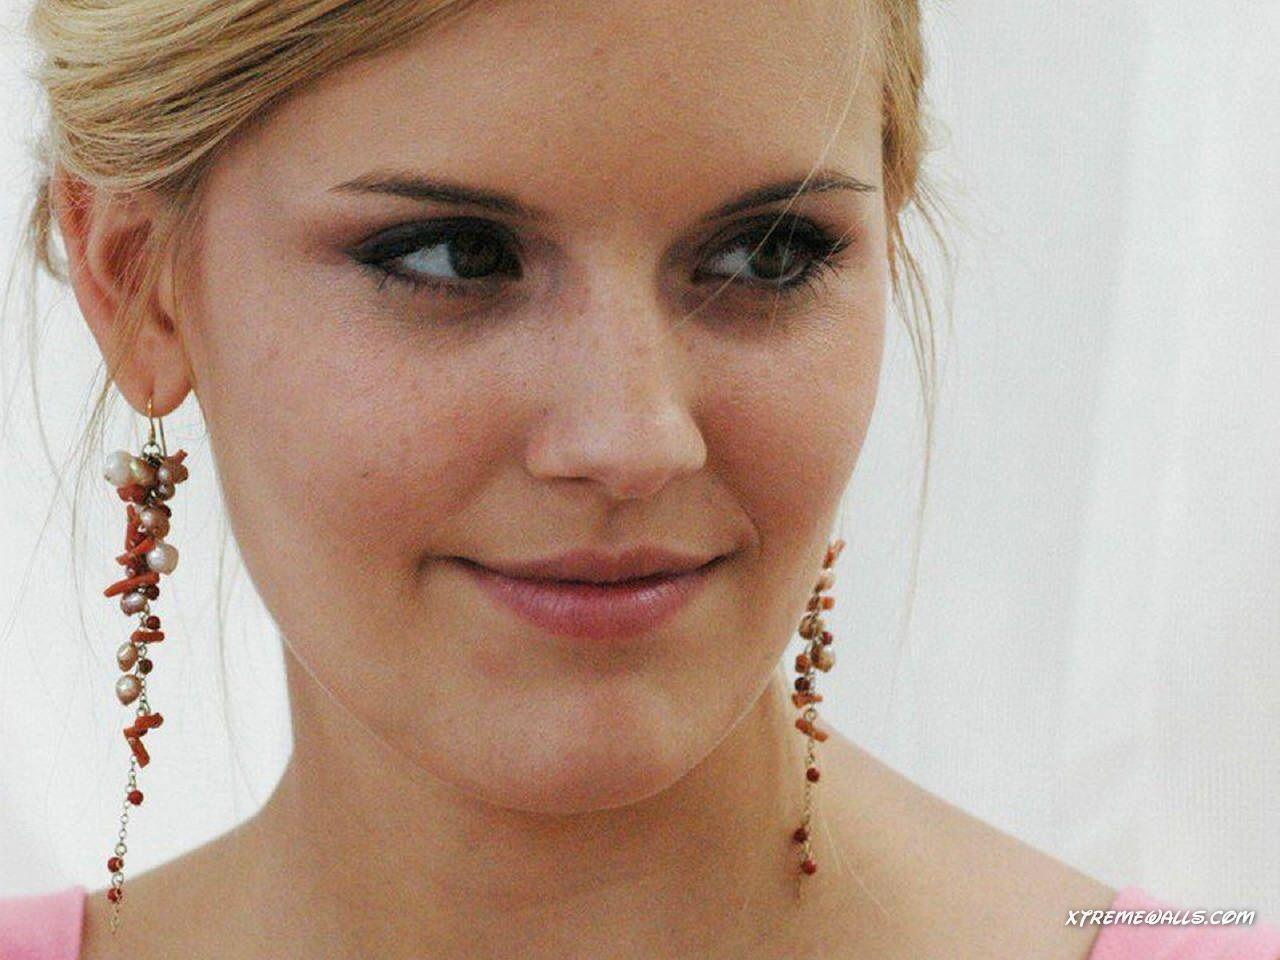 Maggie Grace 1280x960 Wallpaper (High Resolution Picture)